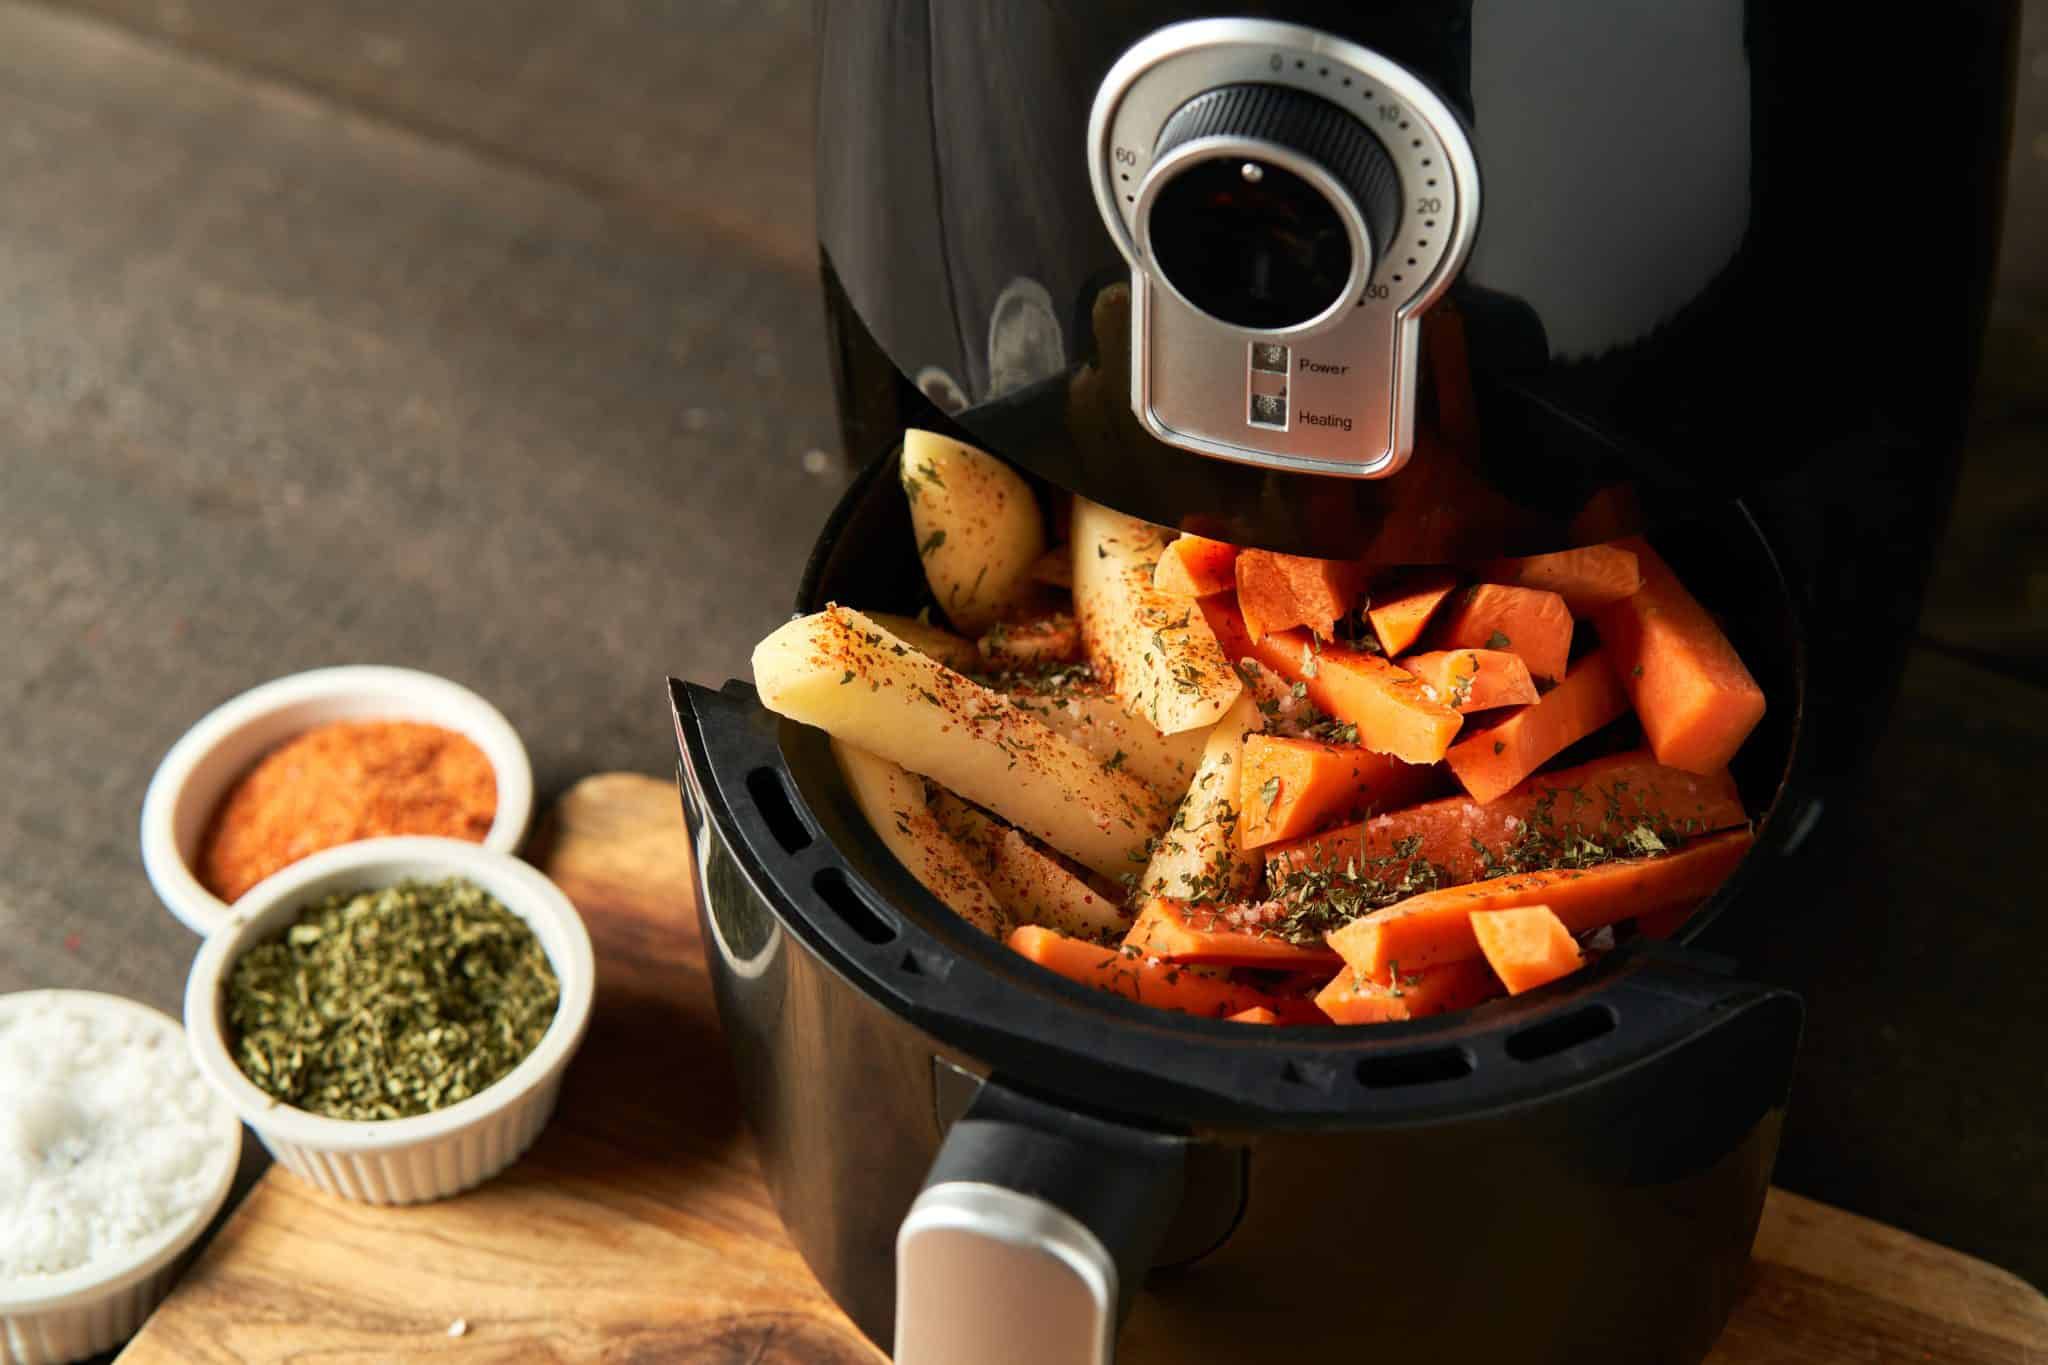 Discover why air fryers are a popular countertop appliance